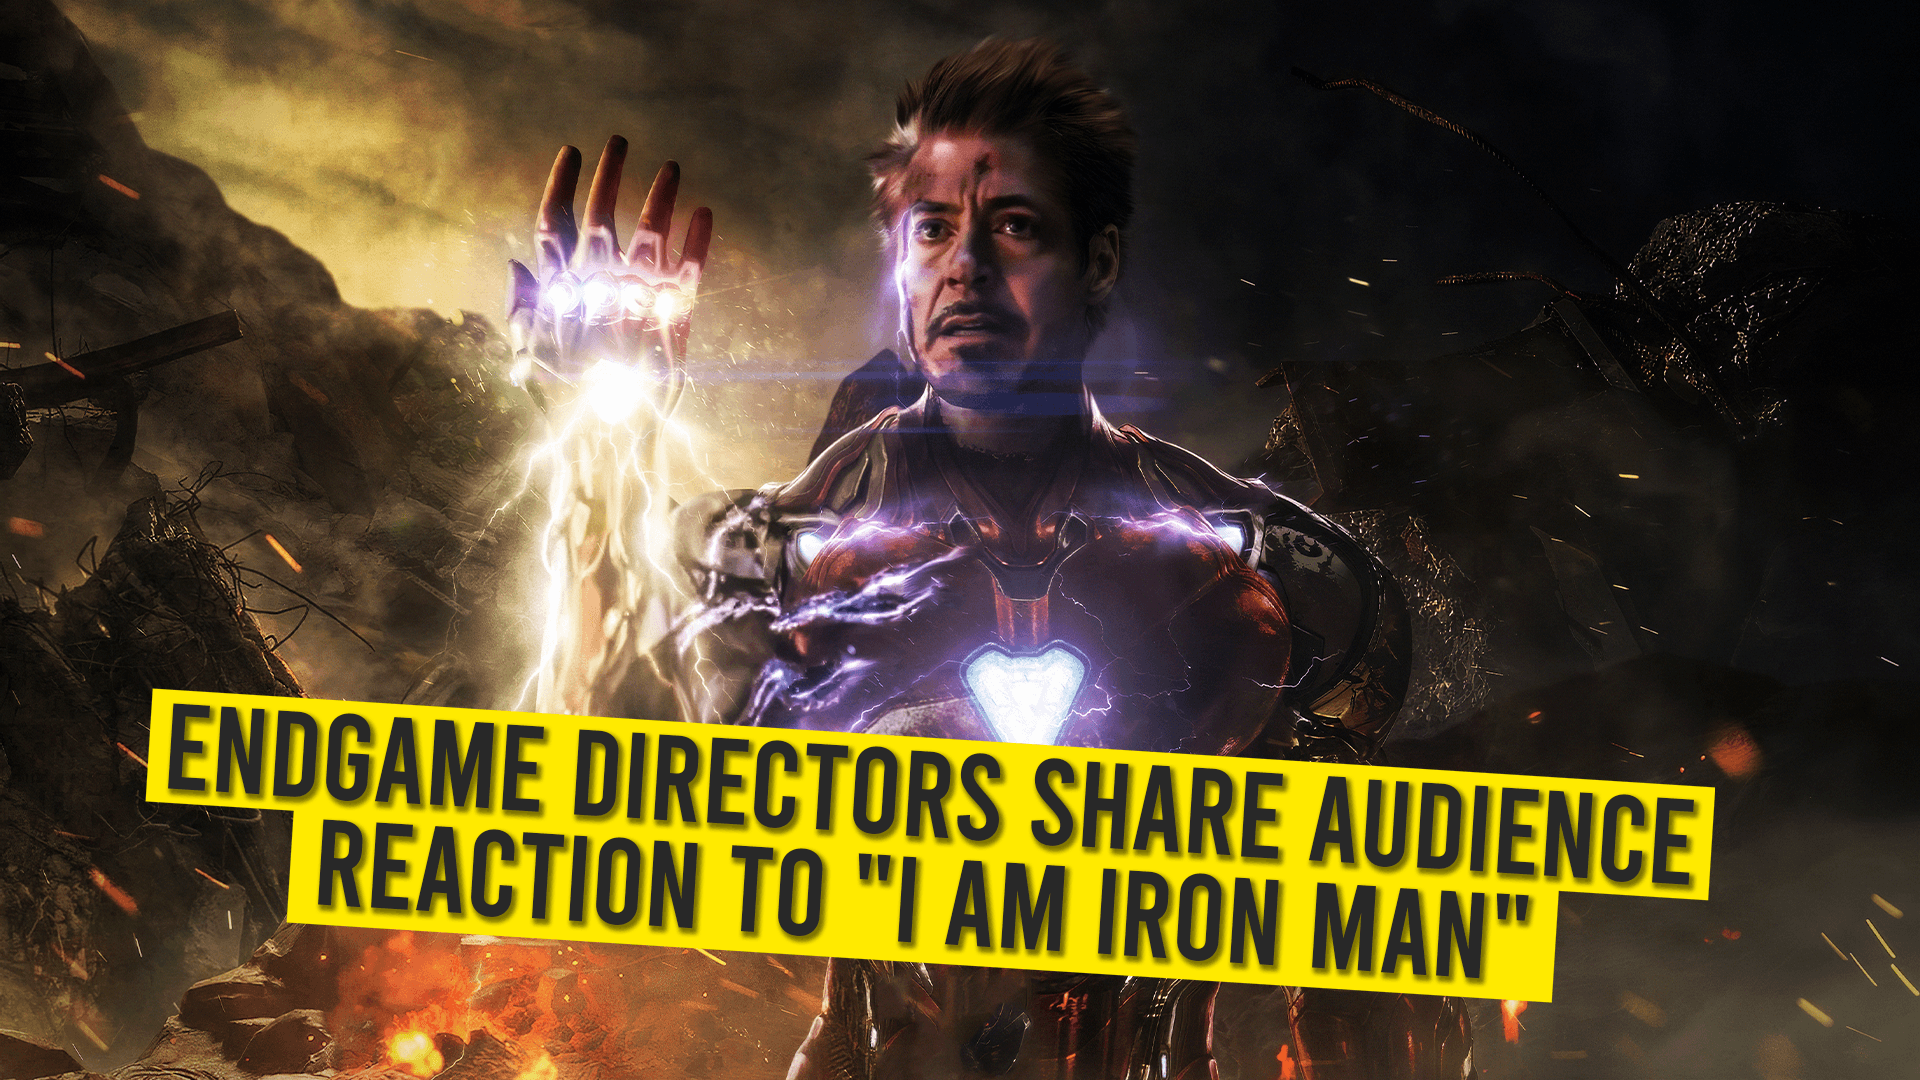 Endgame Directors Share Audience Reaction To “I Am Iron Man”